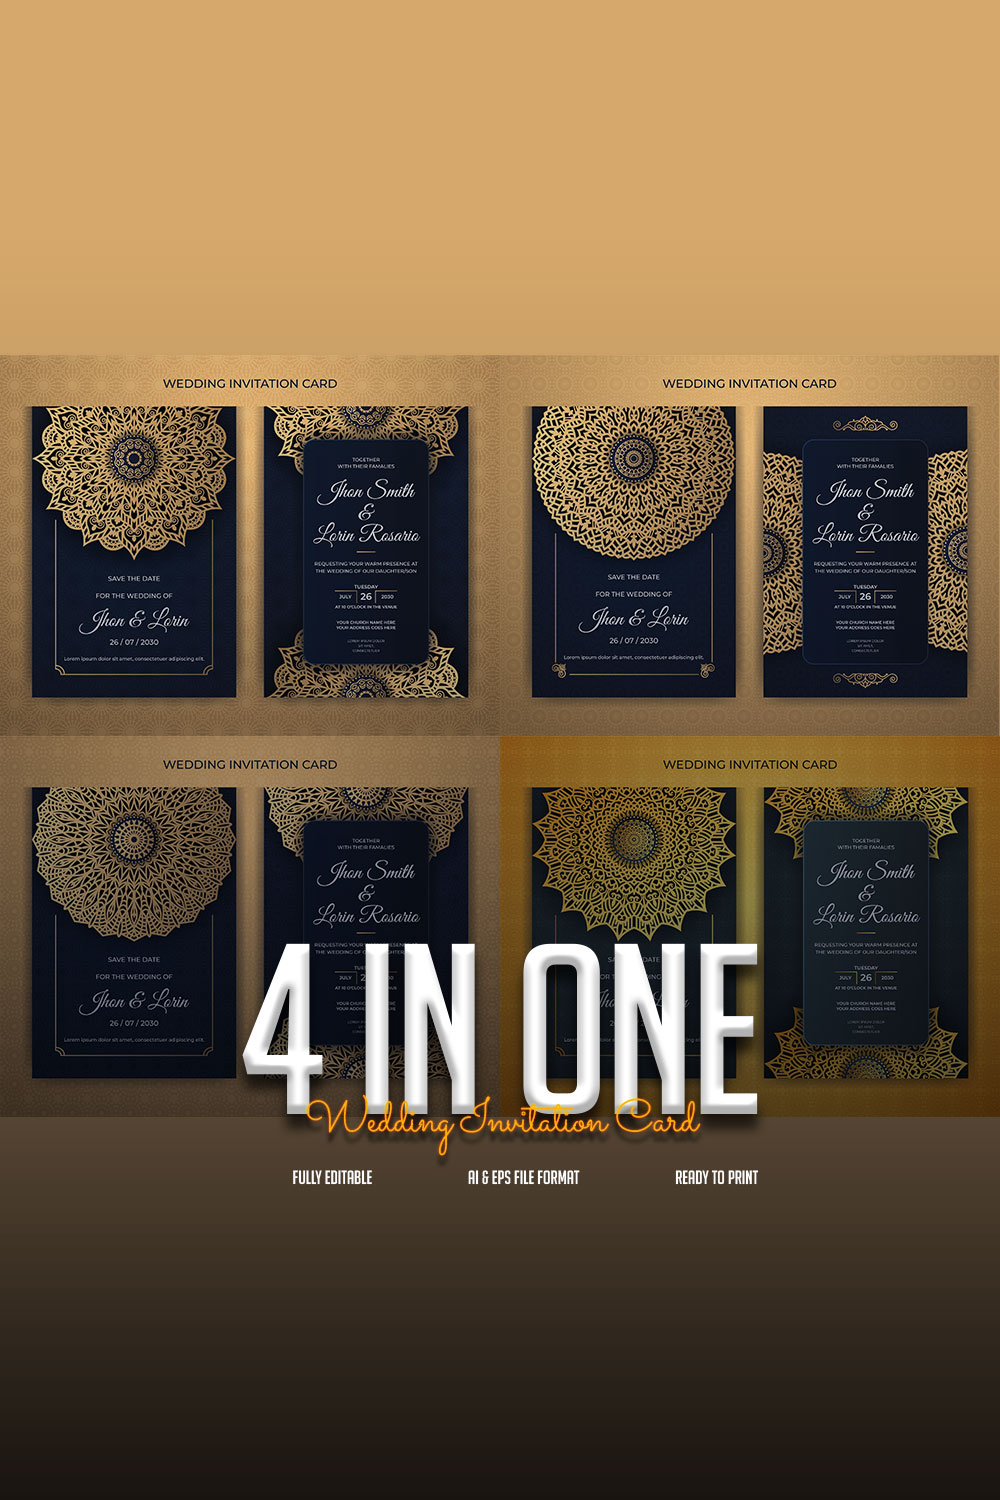 4 In One Luxury Wedding Invitation Card Design Only In $7 pinterest image.